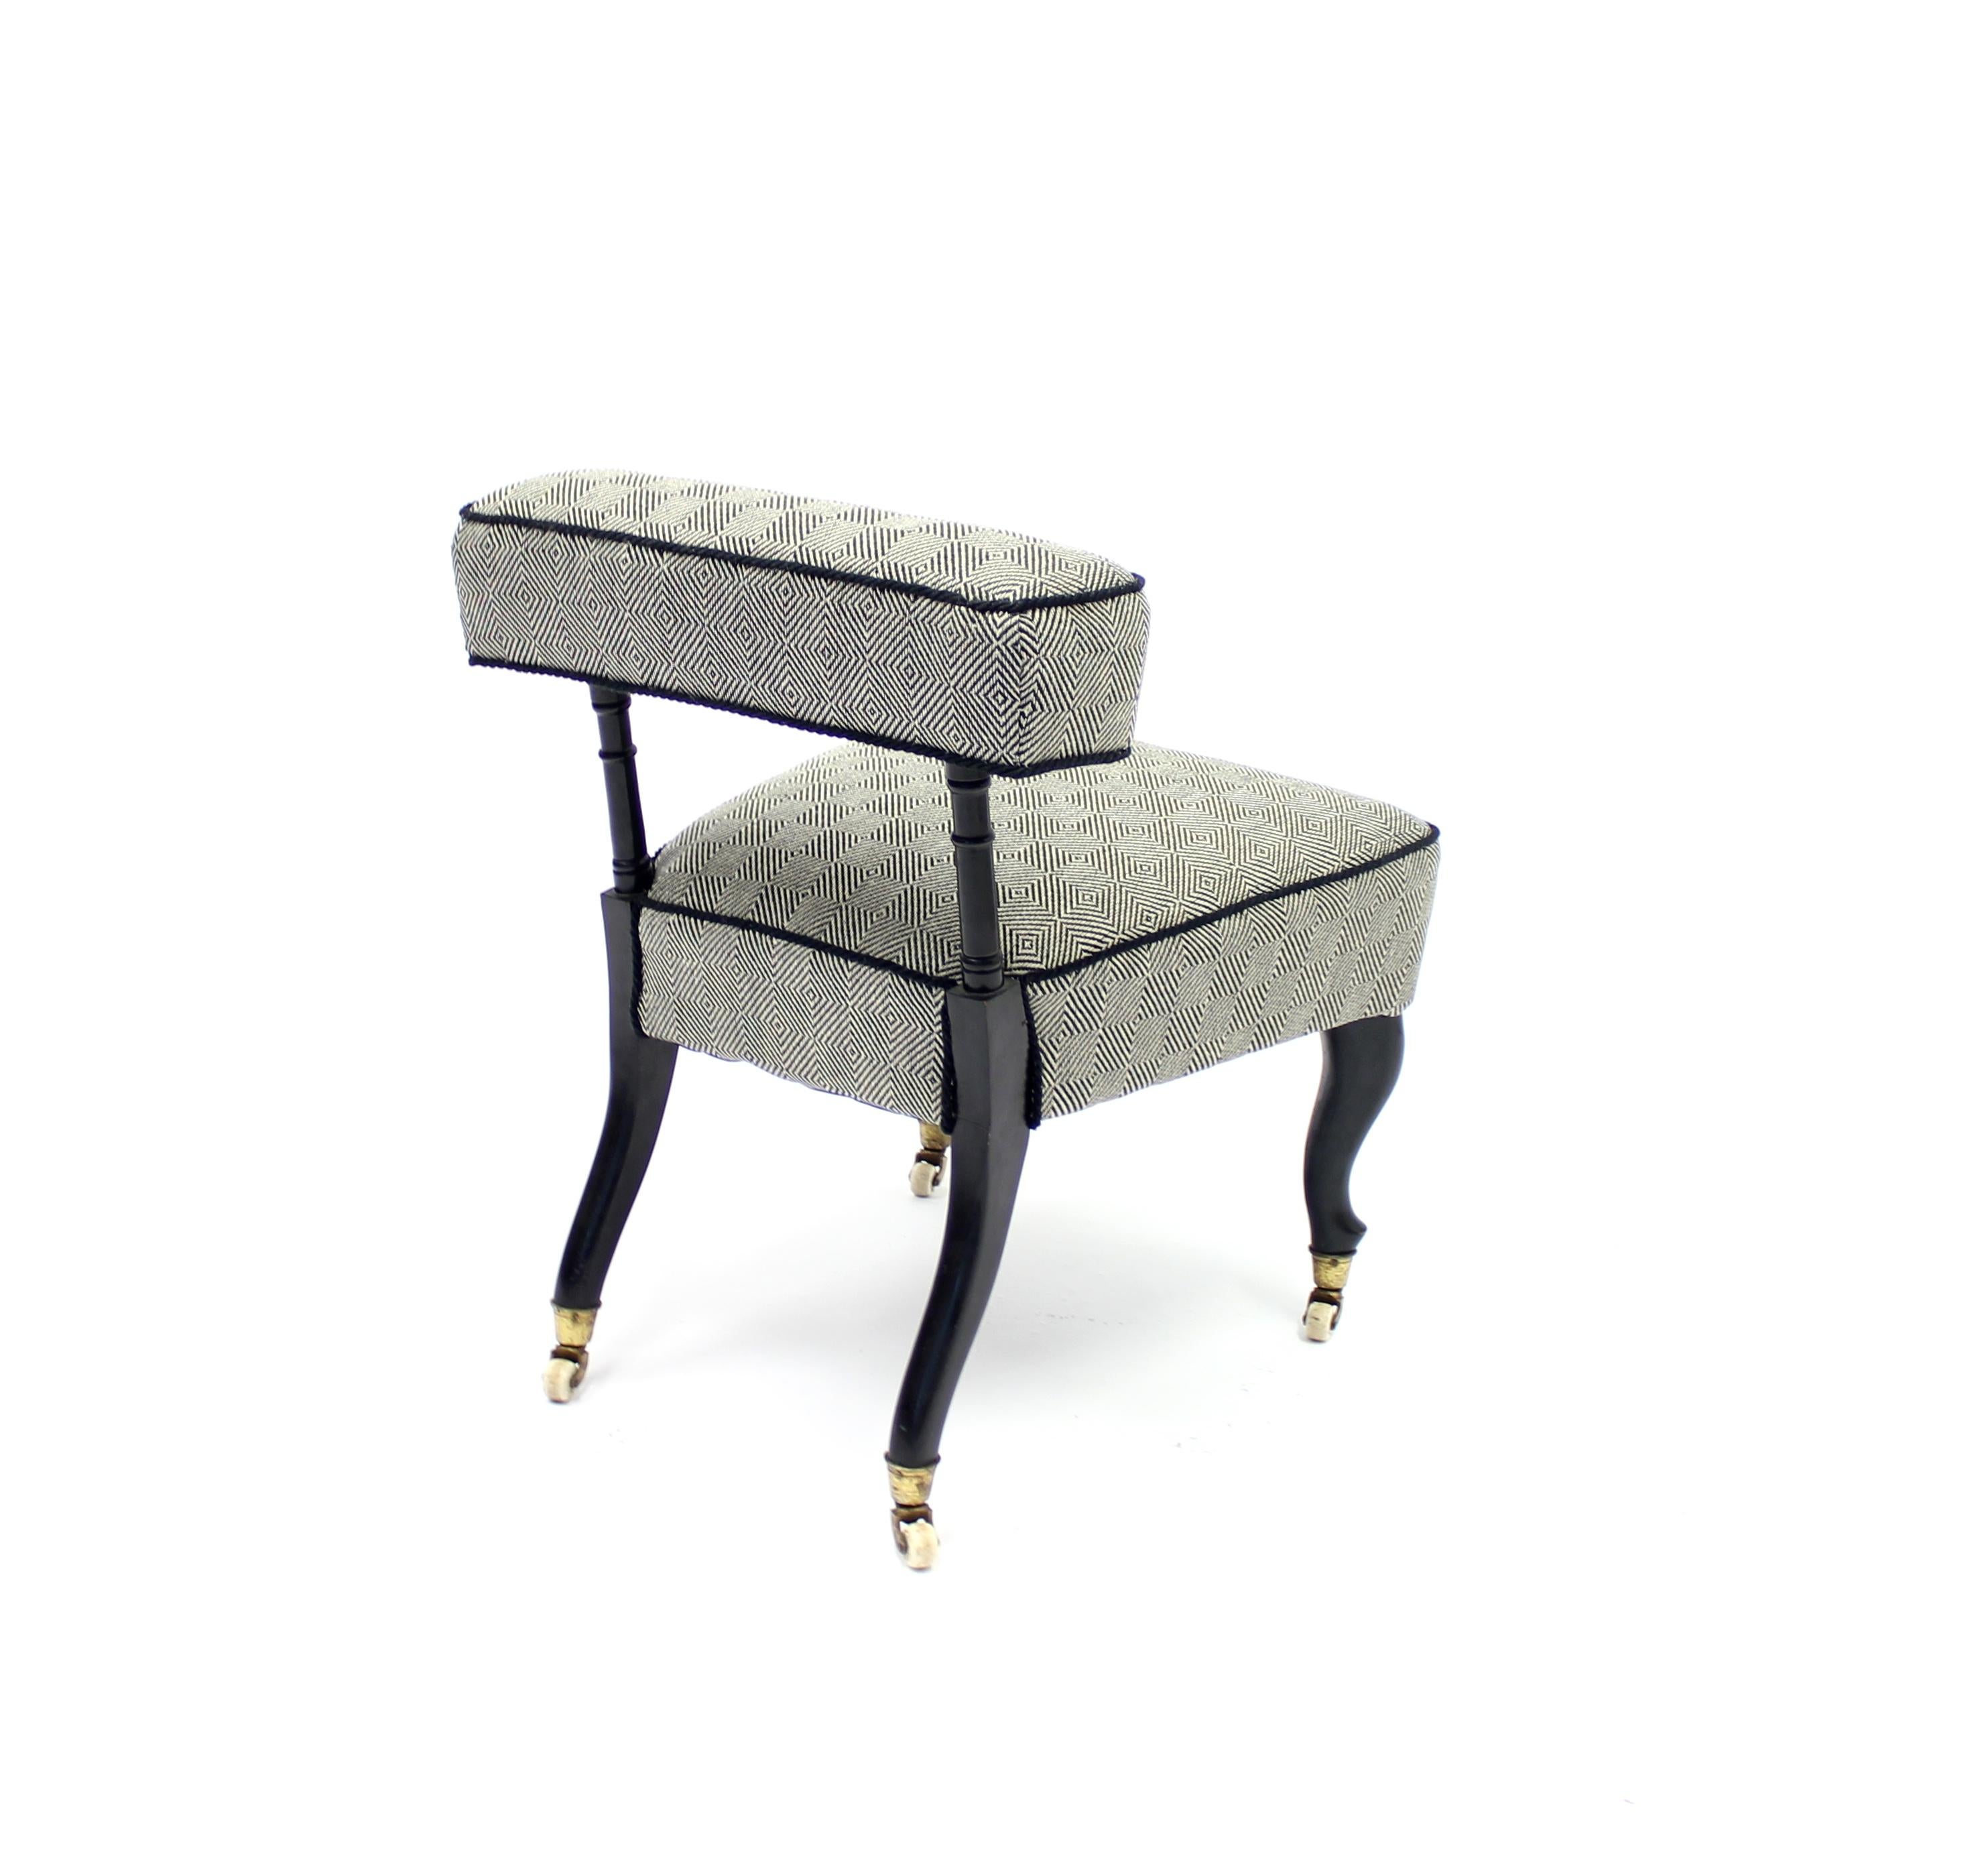 Brass Antique Ebonized Reading Chair on Castors, Late 19th Century For Sale